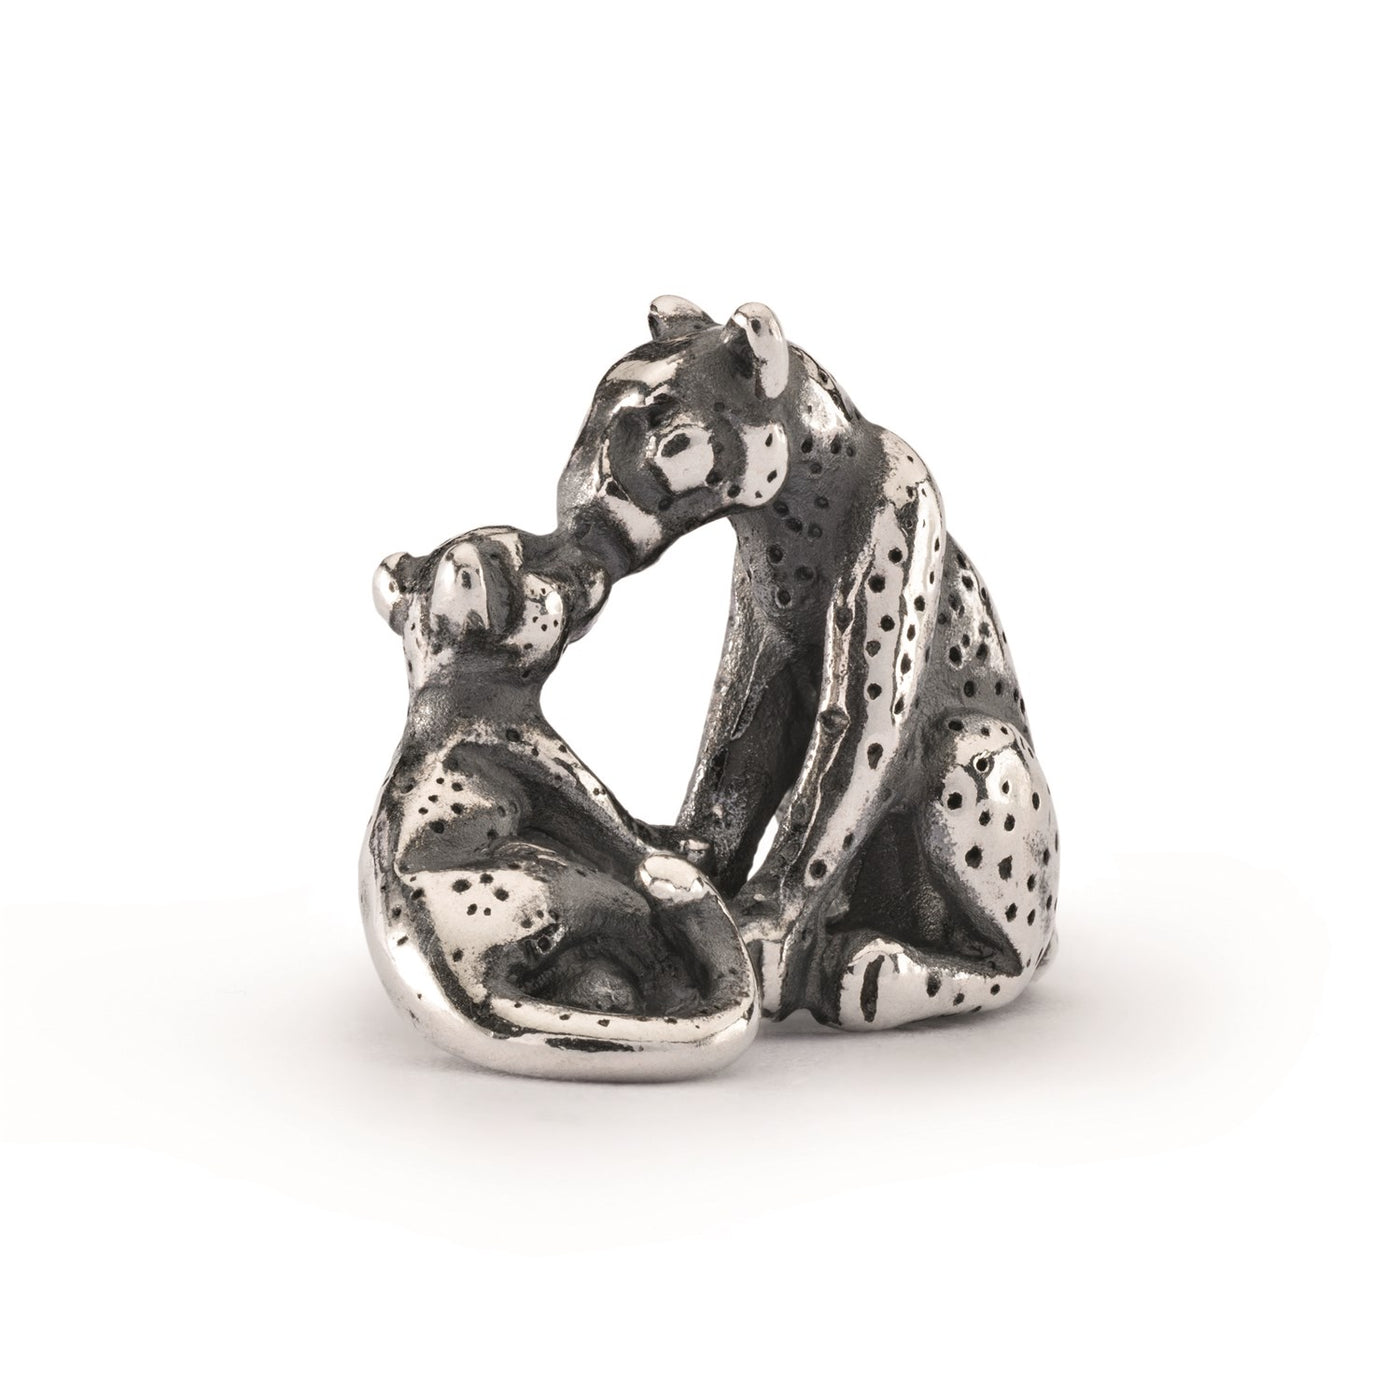 Leopard cub and mom silver bead